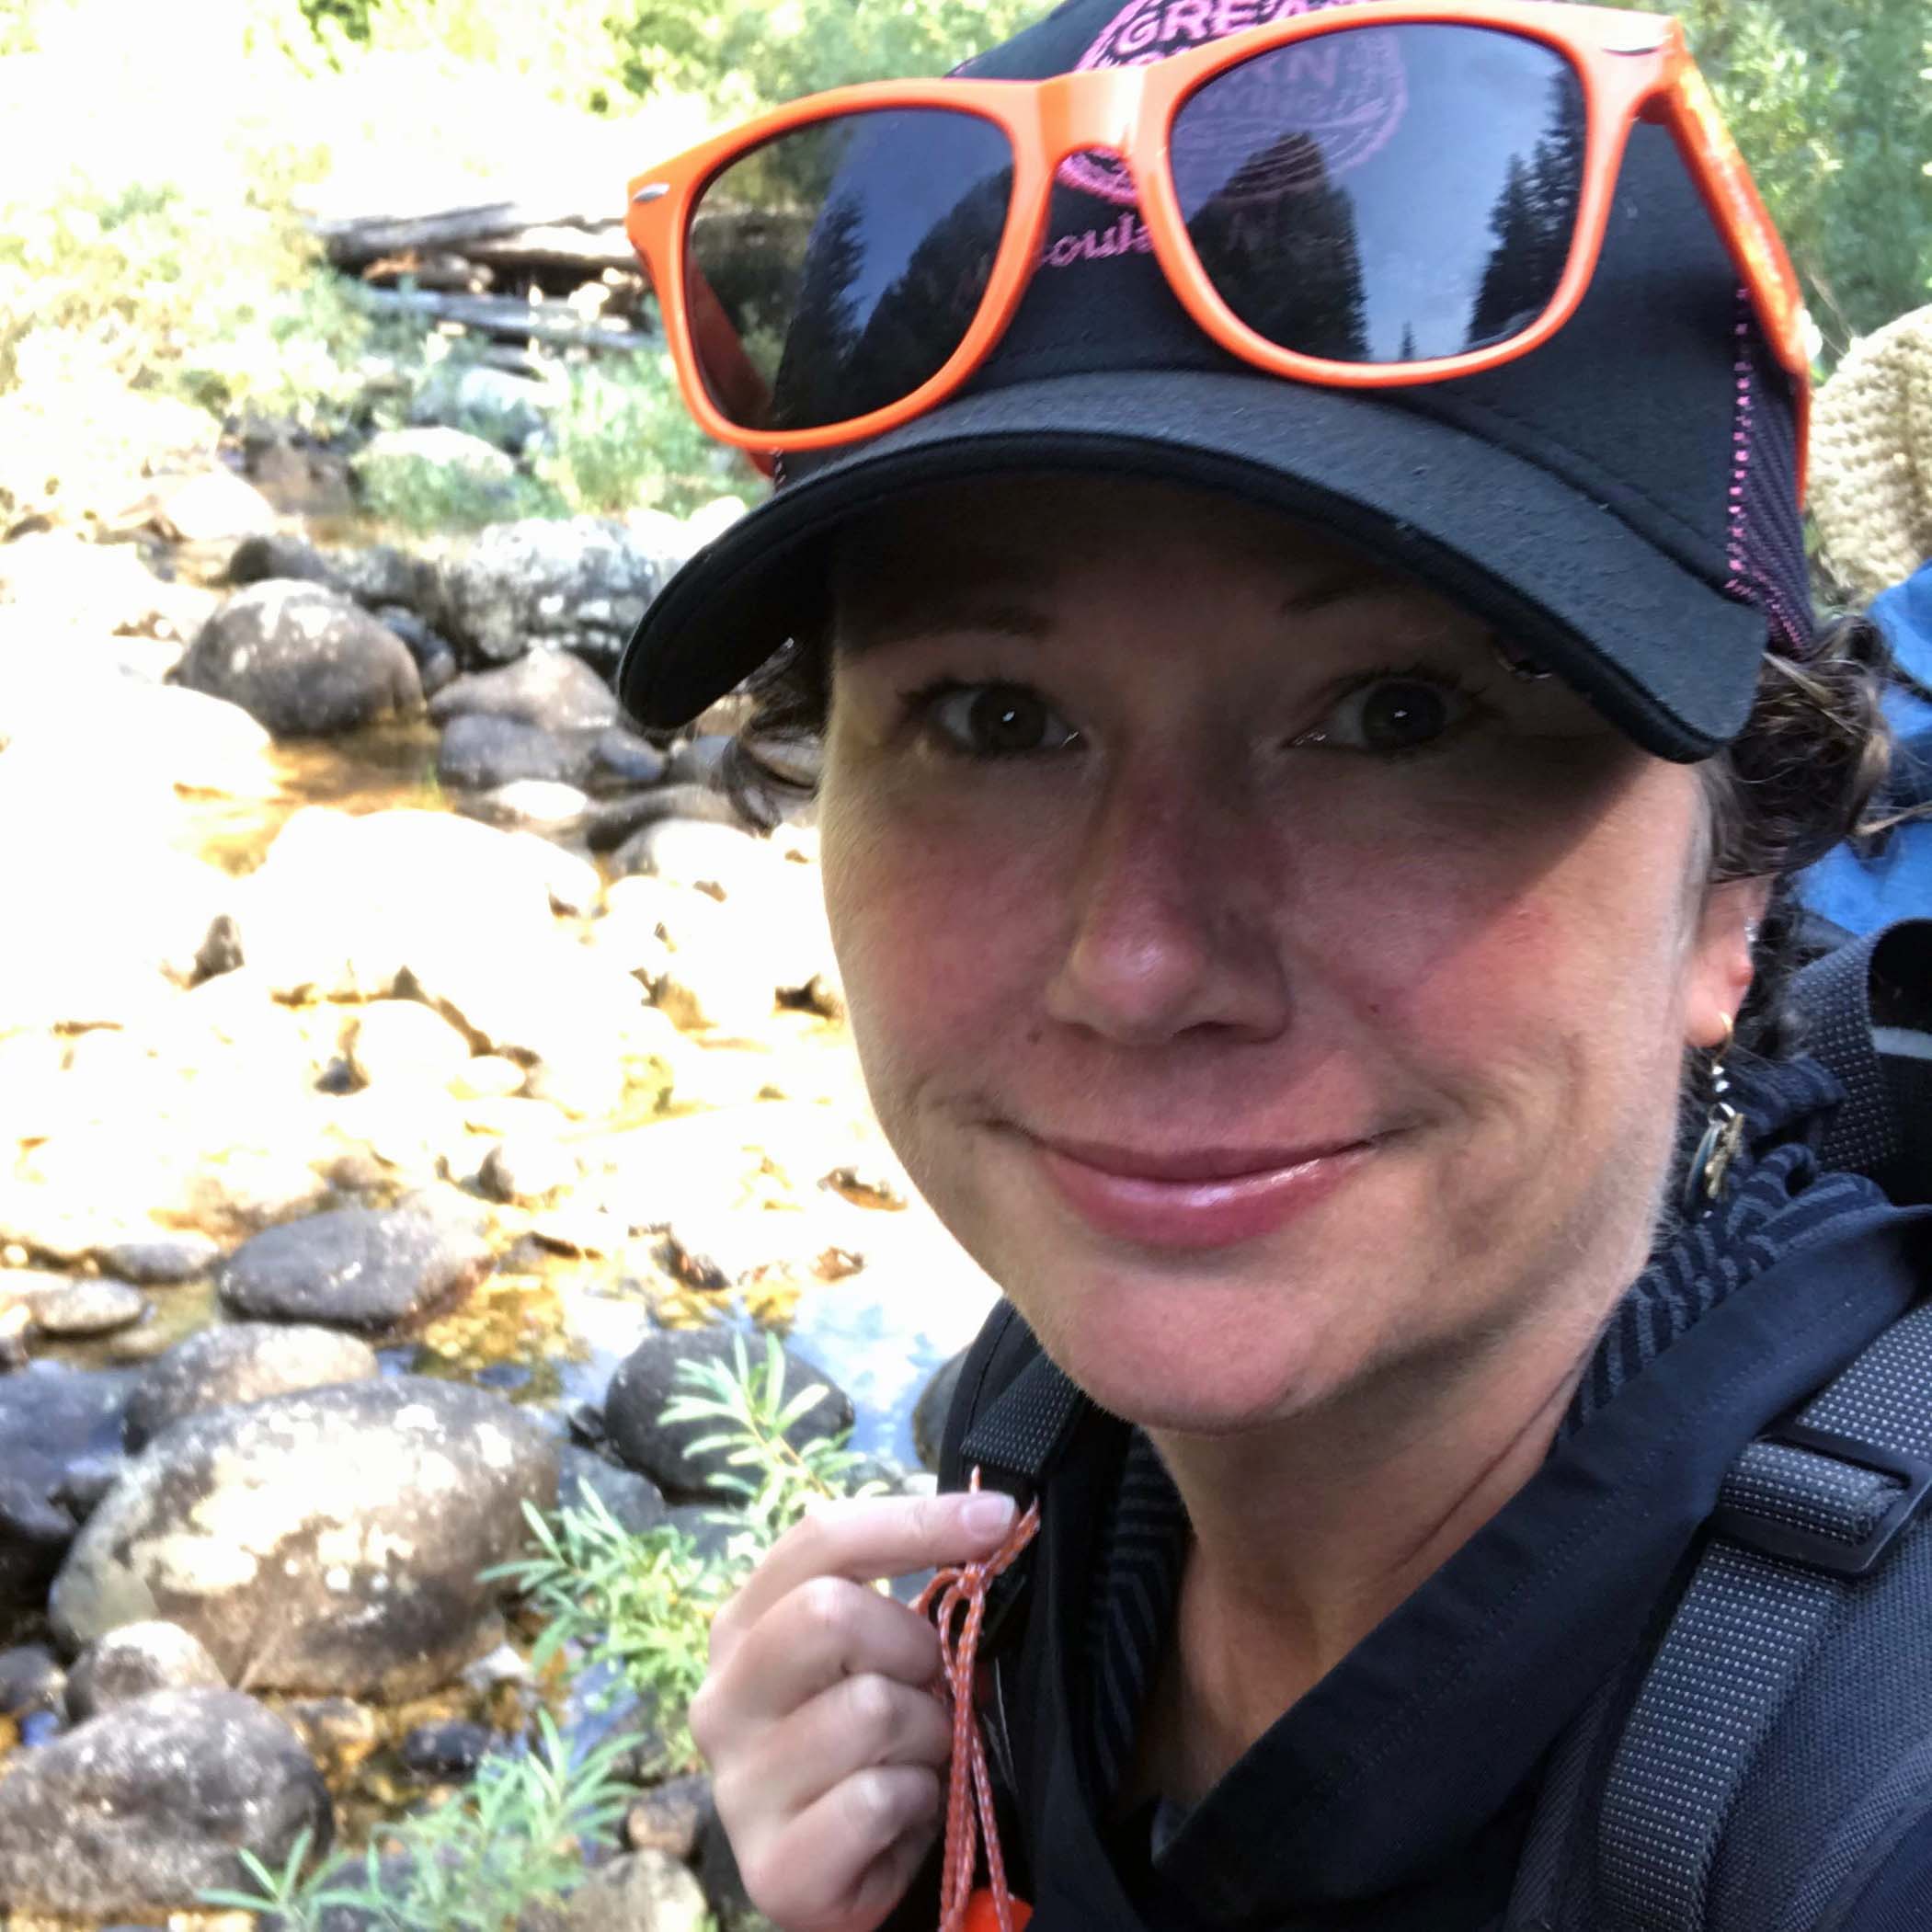 woman wearing a ball cap on a hike in the woods